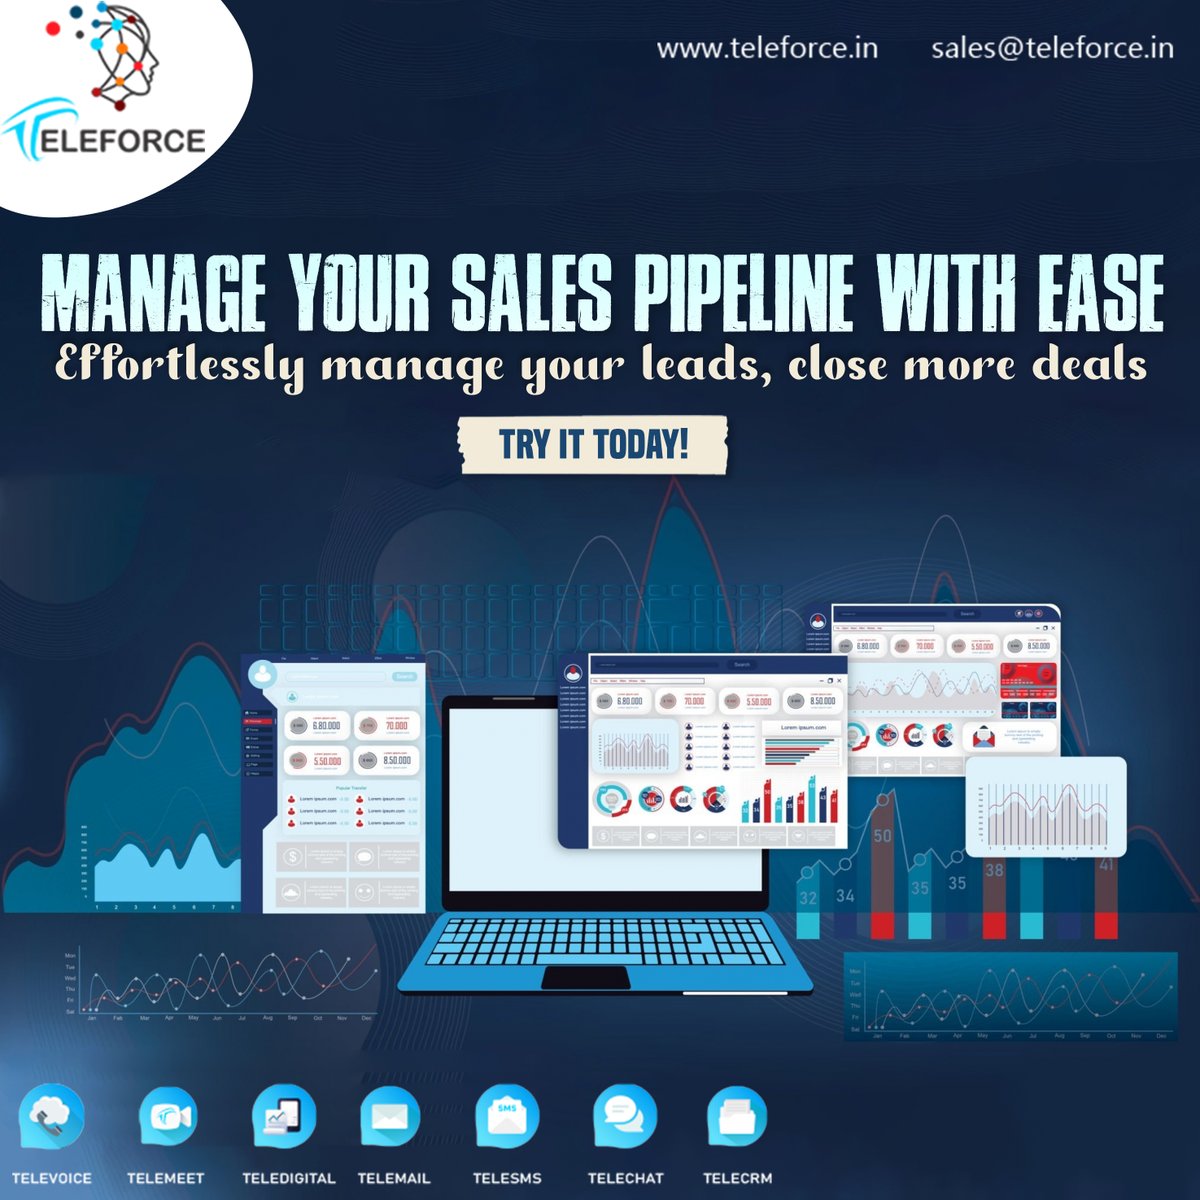 Manage your sales pipeline with ease: Effortlessly manage your leads, close more deals, Try it today!

#SalesPipelineManagement #LeadManagement #SalesProcessOptimization #CRMSoftware  #BoostRevenue #SalesManagement #BusinessSuccess #SalesAutomation #SalesAnalytics